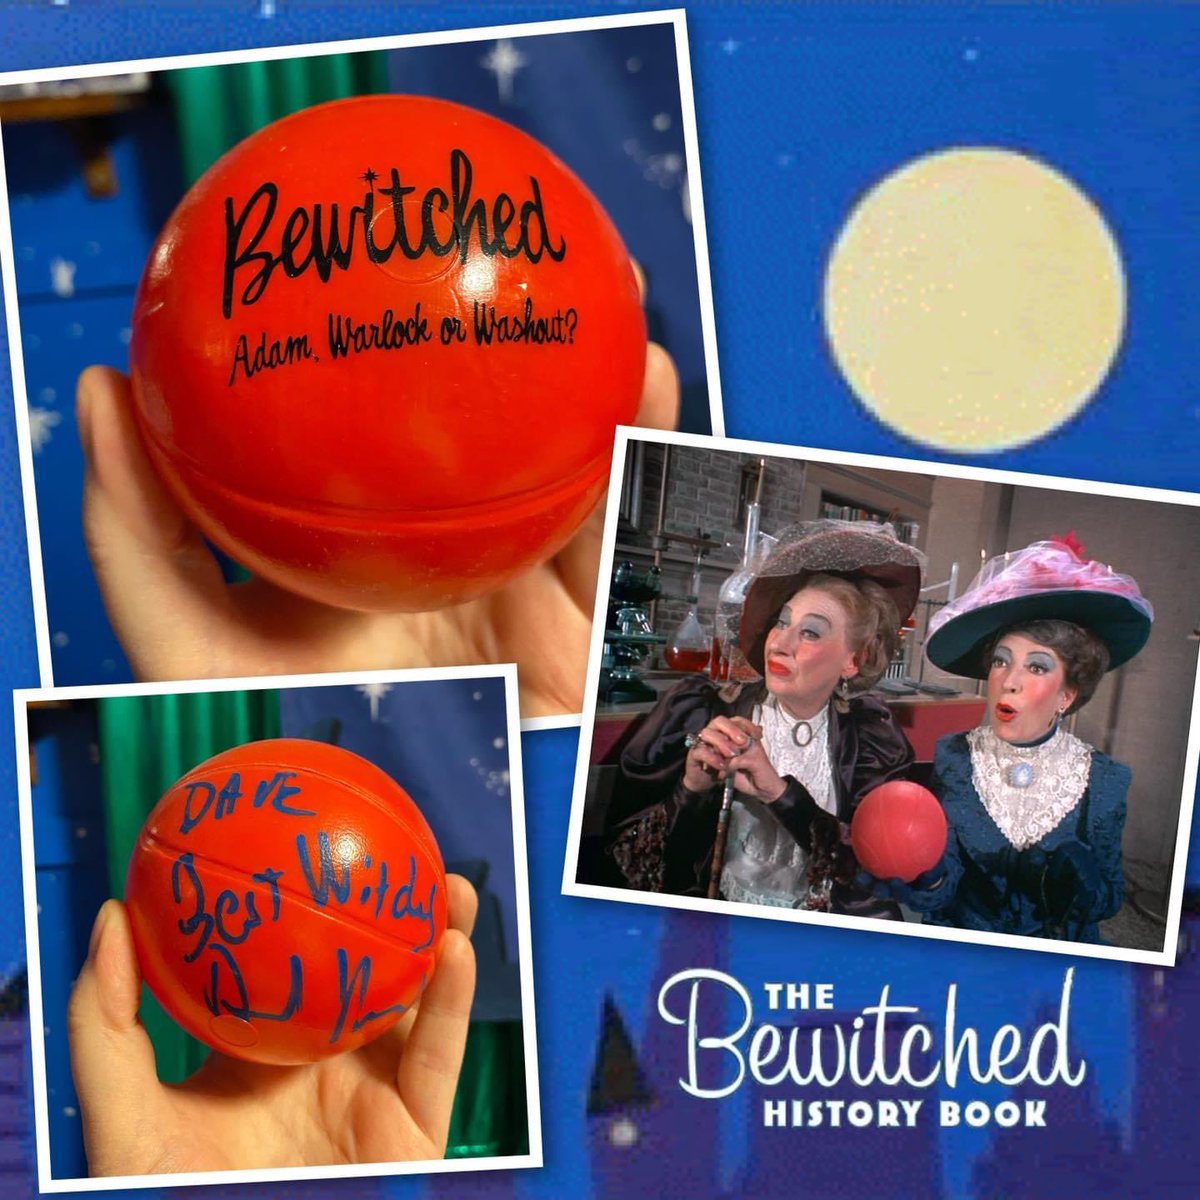 “See the ball? The ball is red. Make the red ball fly to you!” ~Enchantra, #Bewitched S8 Ep 242: “Adam, Warlock or Washout” David Lawrence (Adam) sold these red balls with the logo and name of this episode in 2013. He signed one to me. So cool! #AdamStephens #Witches #Warlock